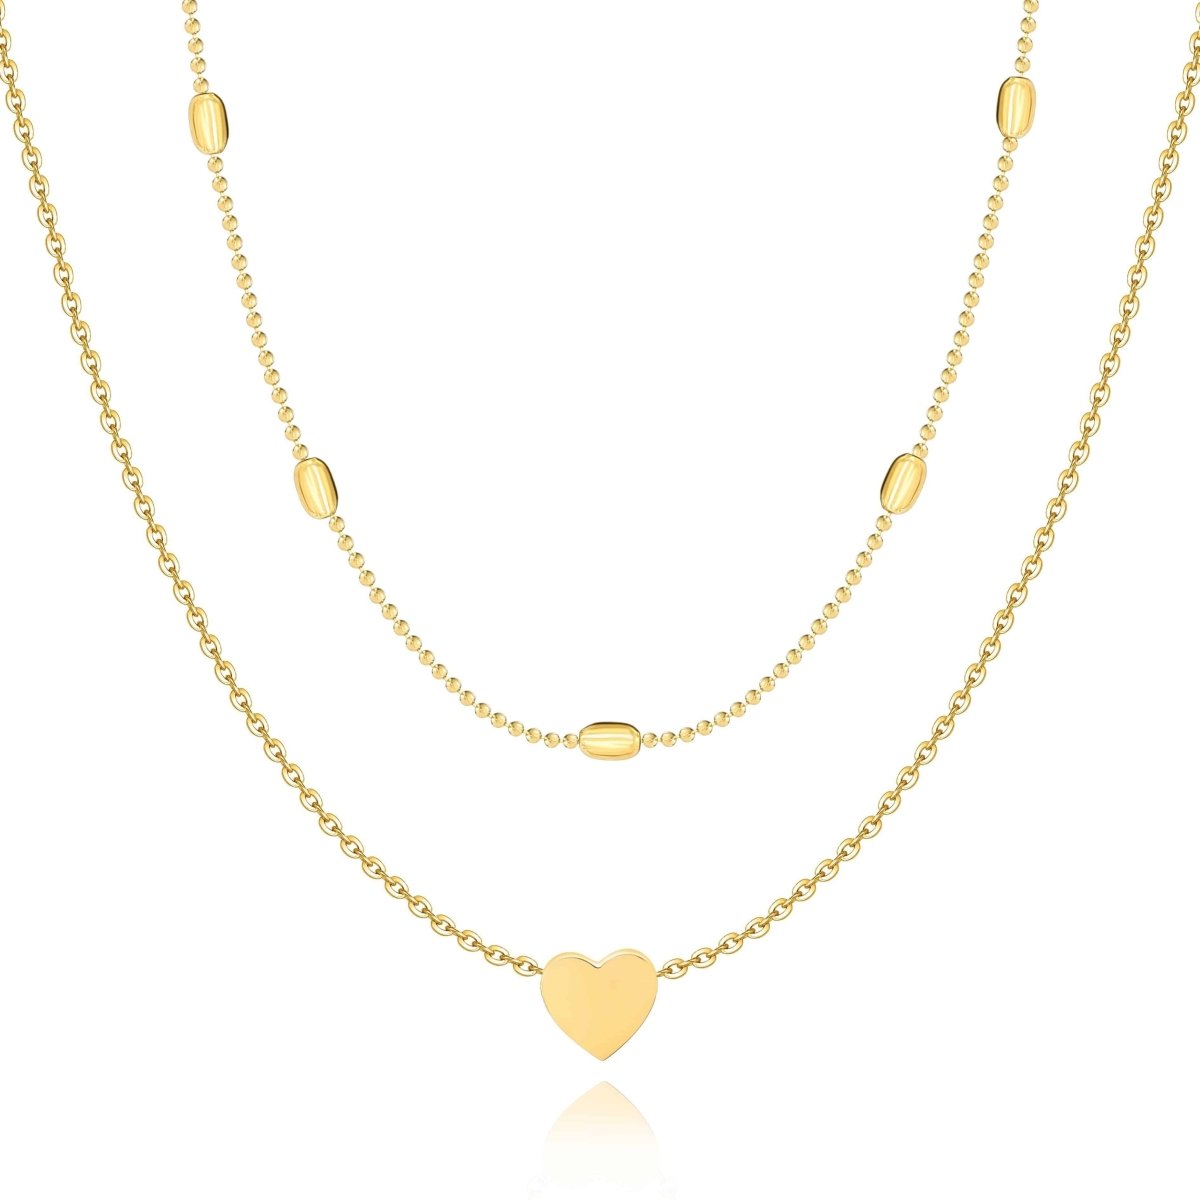 "Love Style" Necklace - Milas Jewels Shop